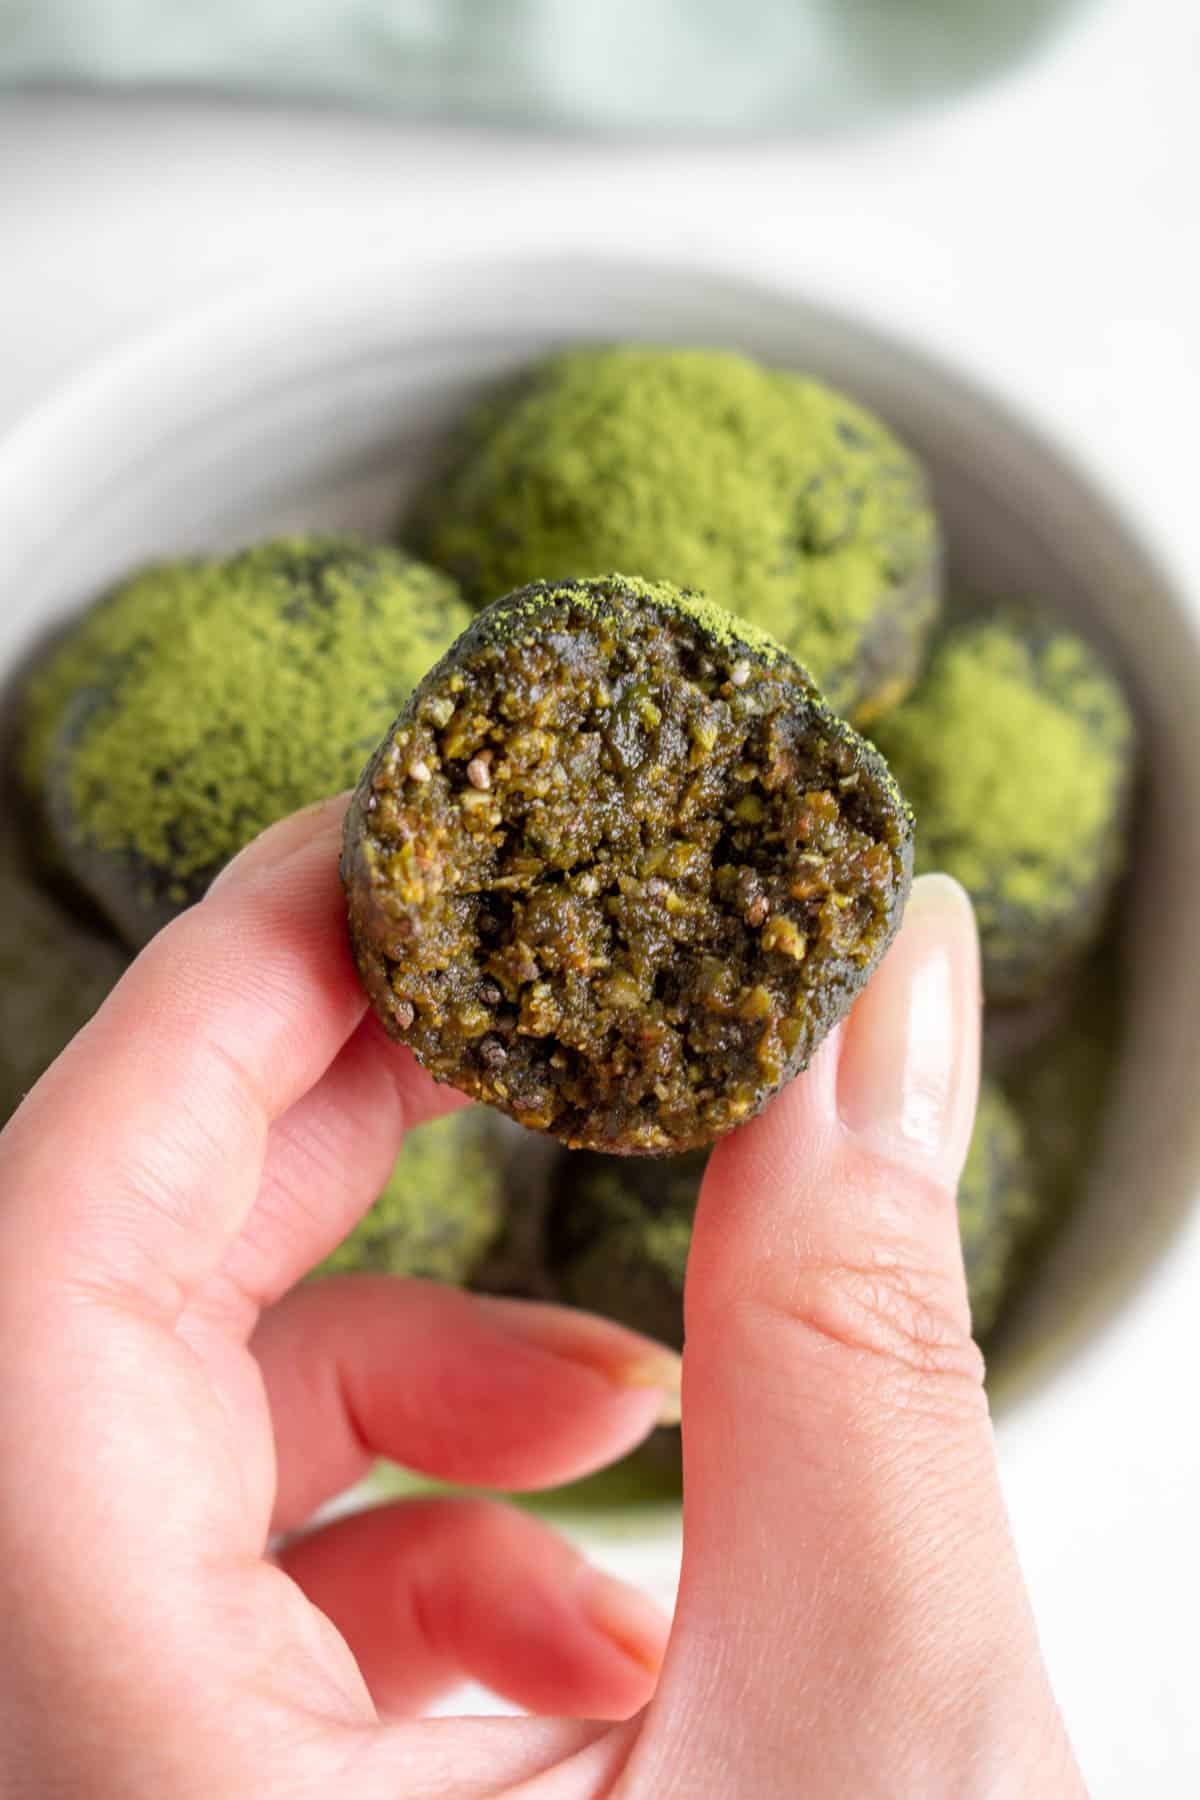 A hand holding up a matcha ball with a bite taken out.